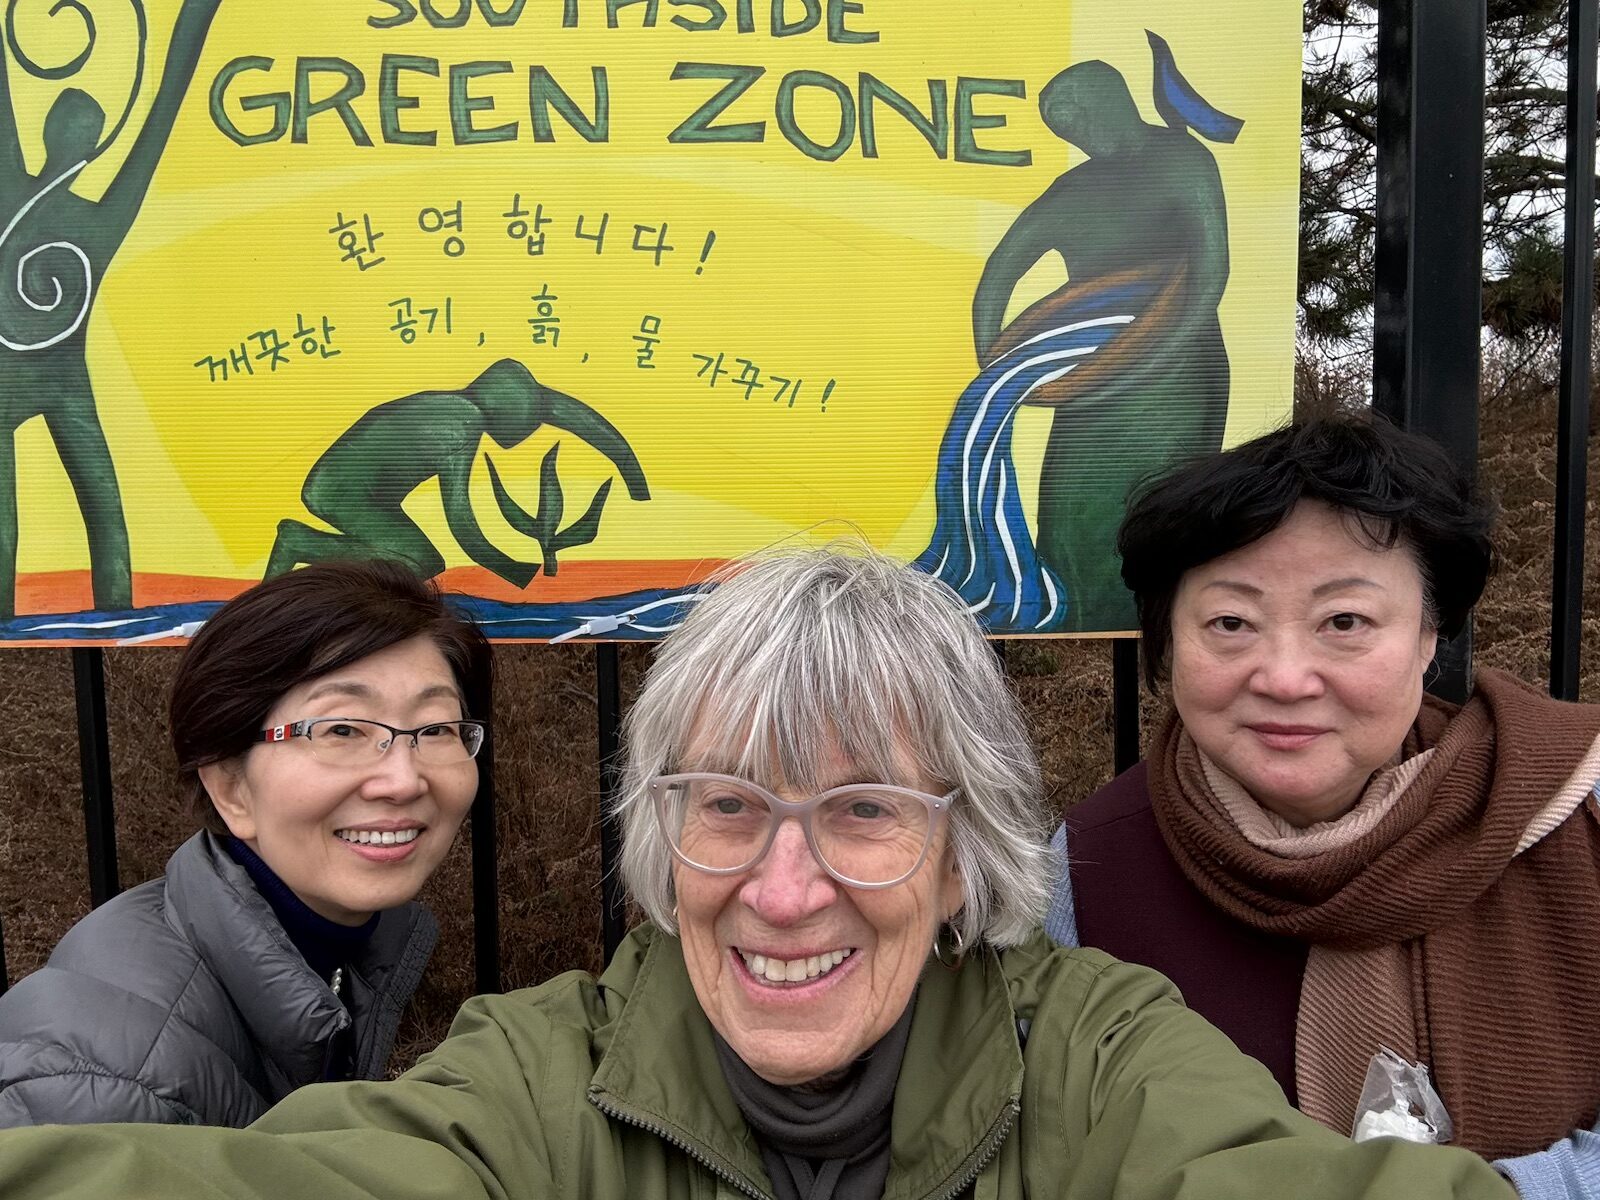 Three people pose for a selfie in front of a banner that reads, "Green Zone". There is more text in another language on the banner.